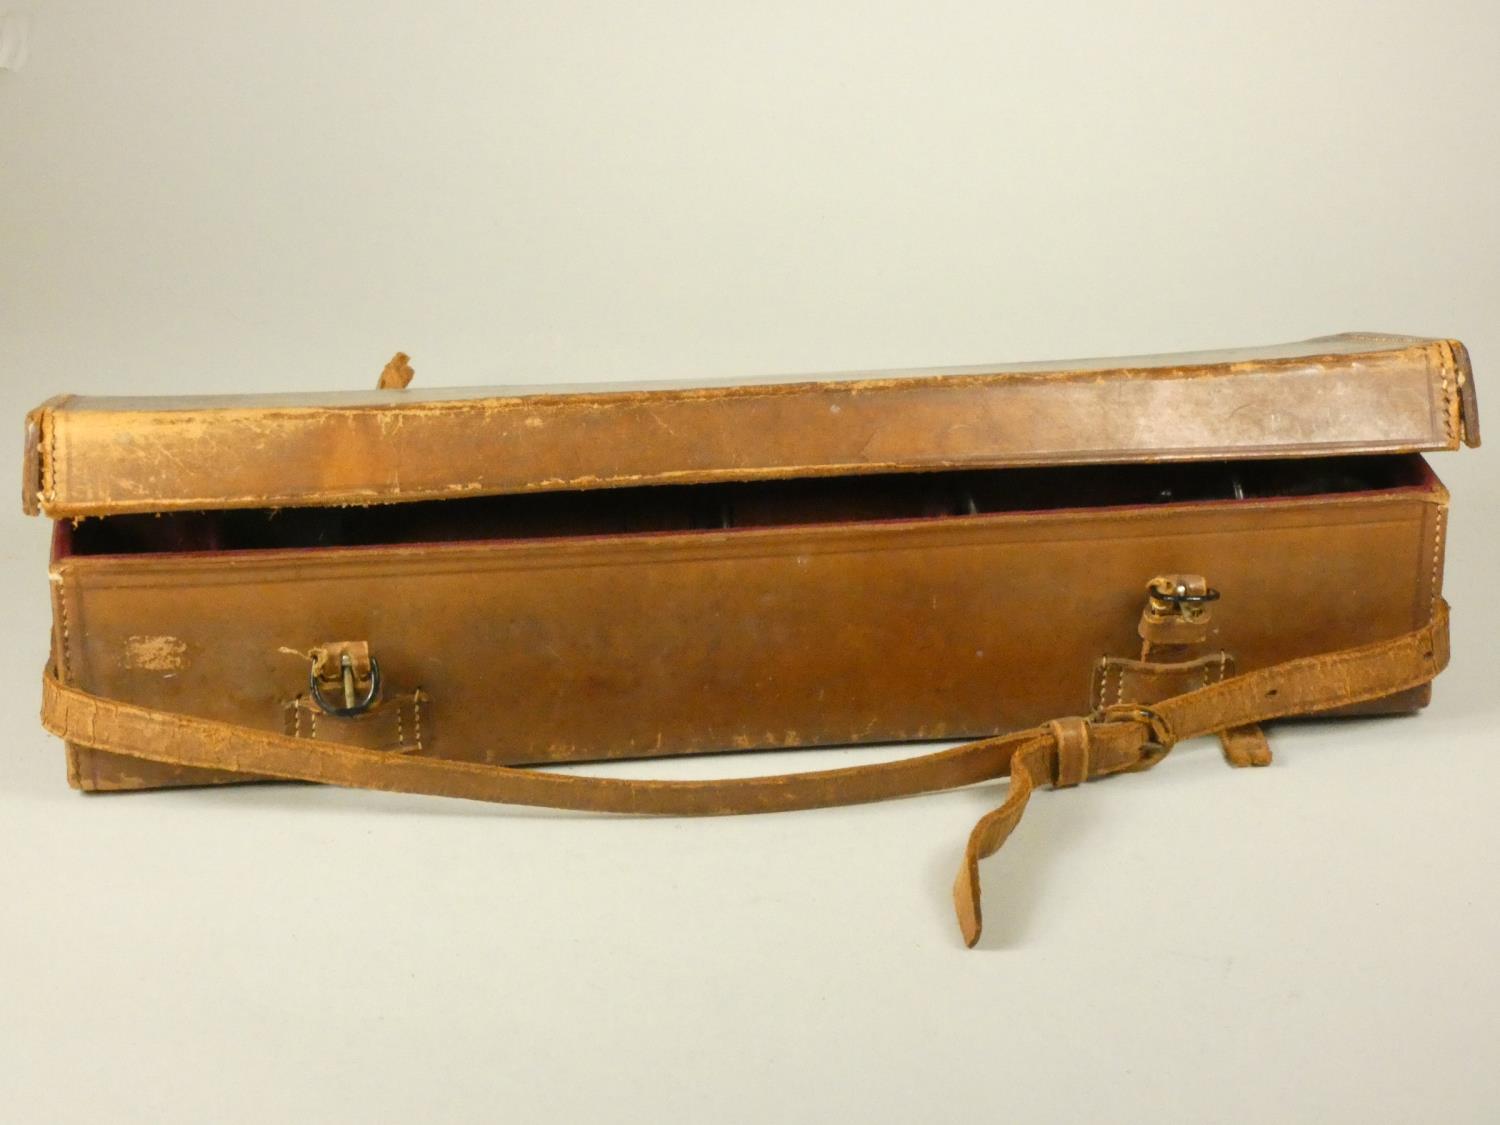 F. Davidson, London, a Davon telescope, leather covered, 37 cm, together with various fittings, - Image 5 of 5